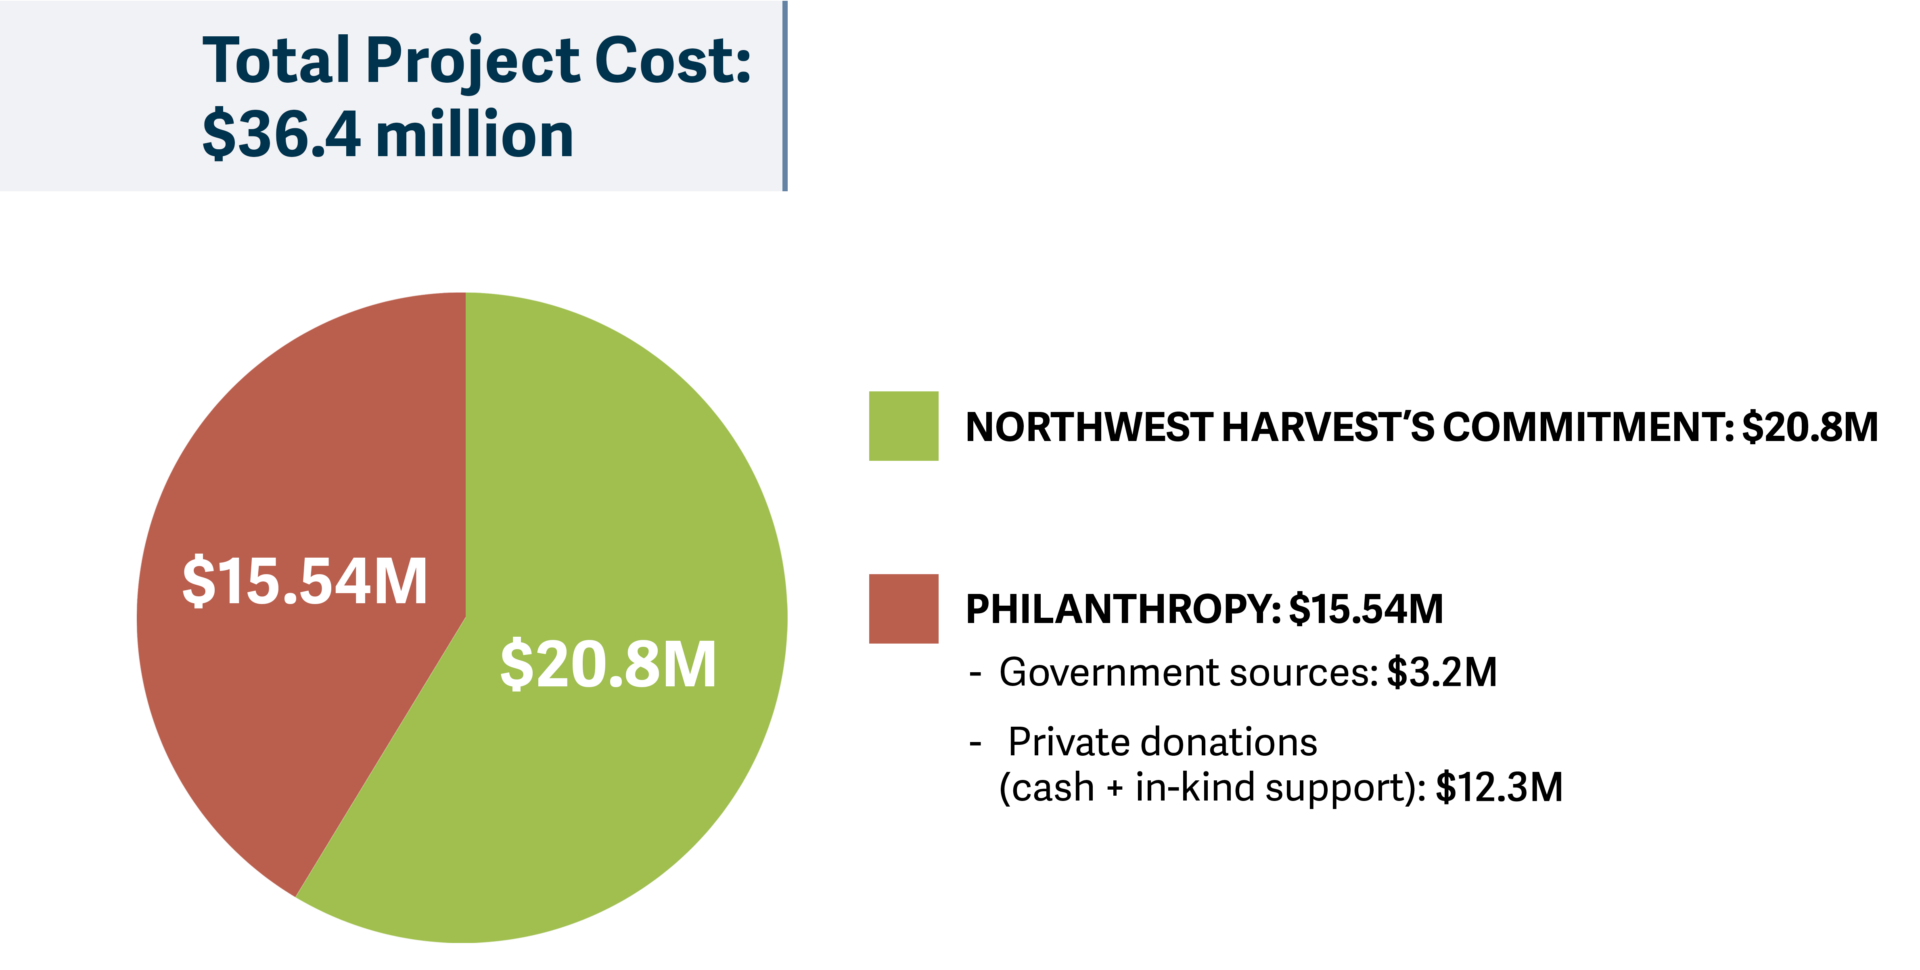 pie chart of total project cost with breakdown of NWH's commitment vs Philanthropy